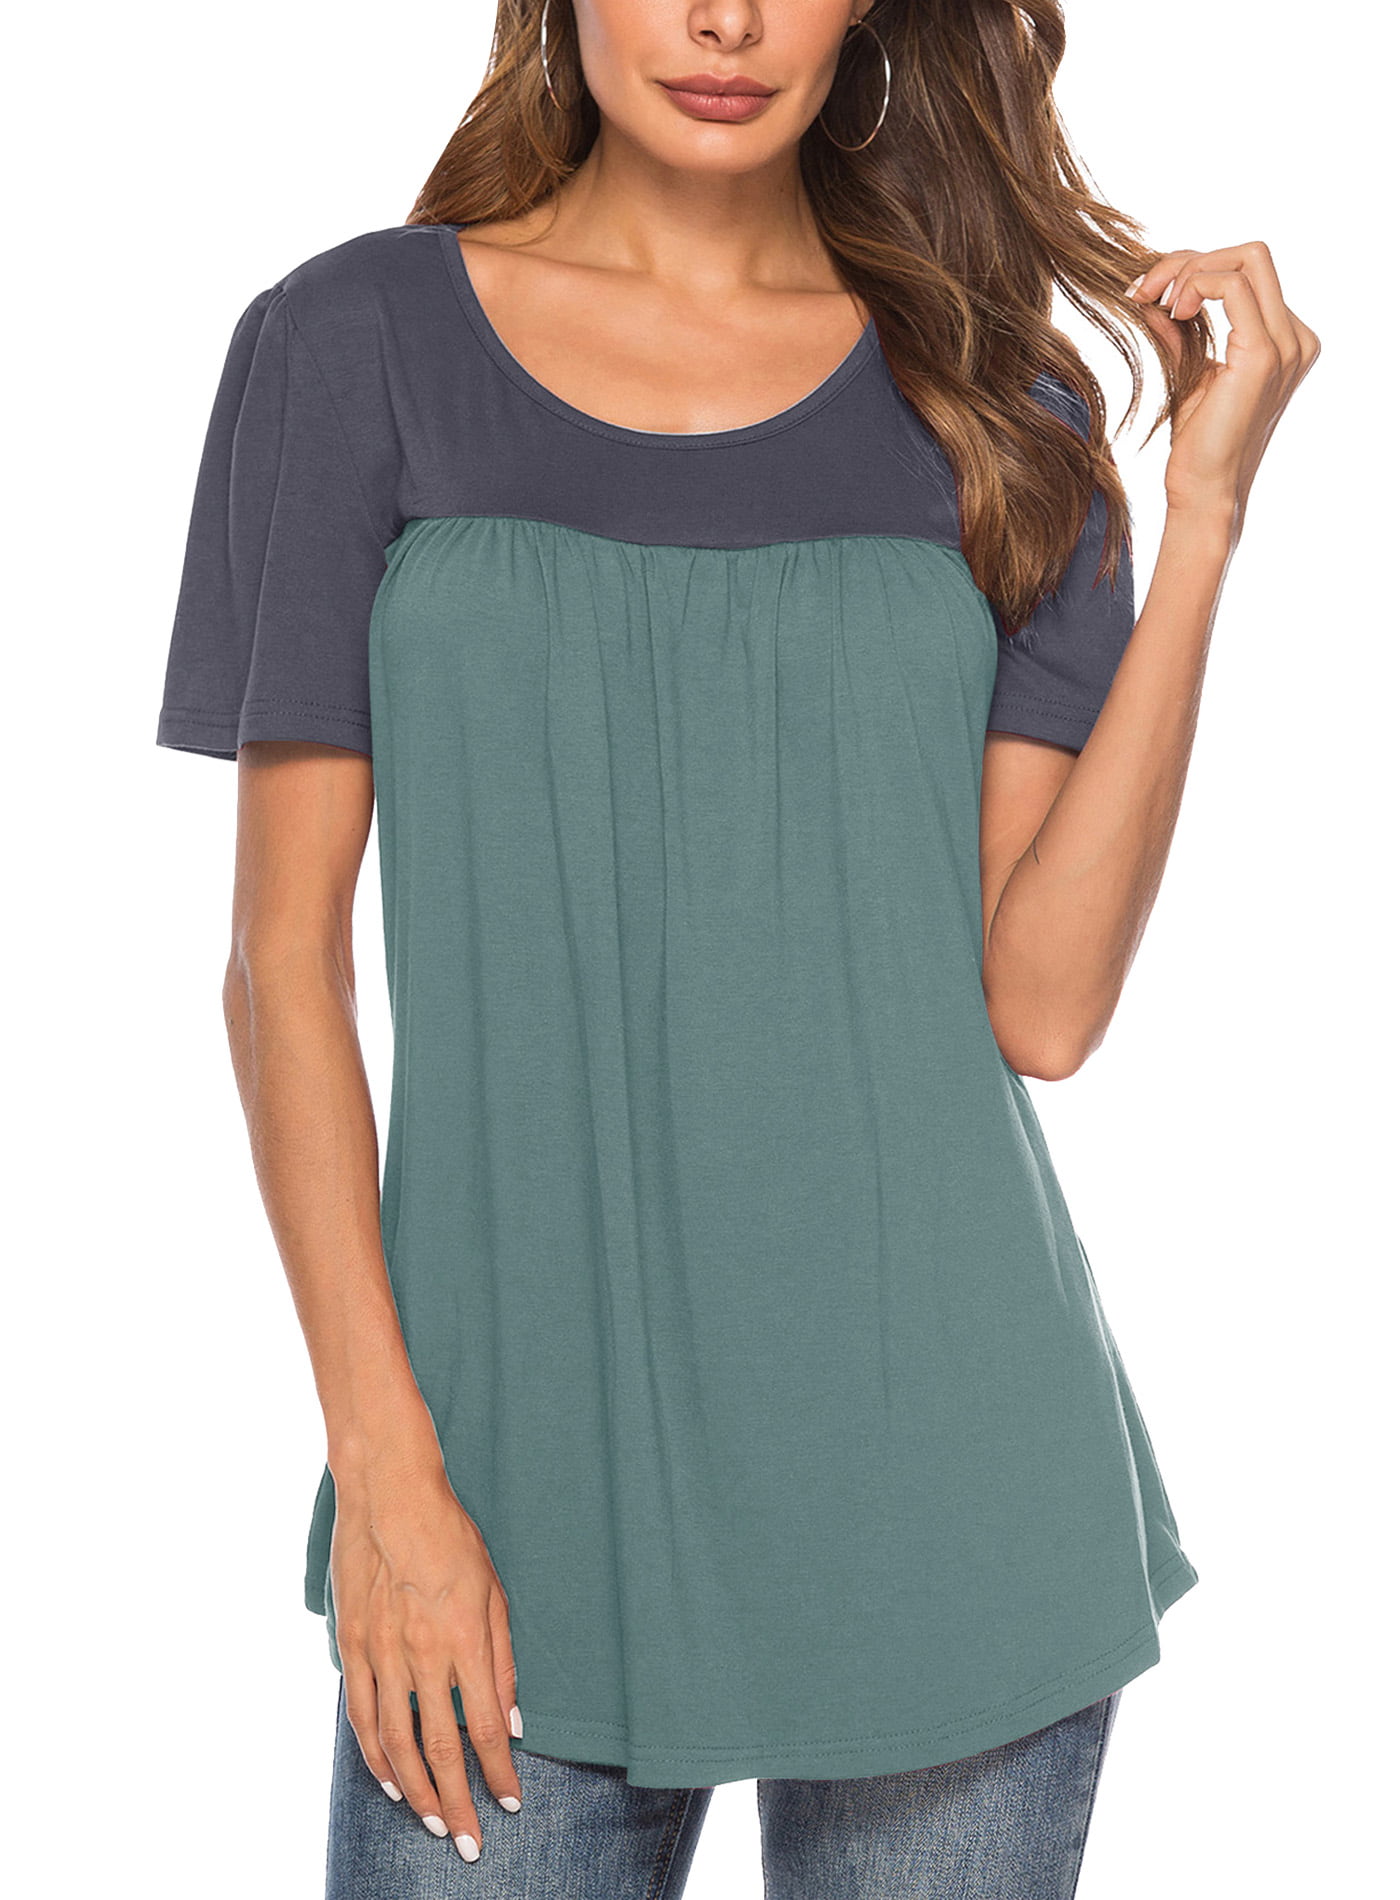 Womens Scoop Neck Pleated Tunic Tops Blouse Solid Color Shirts